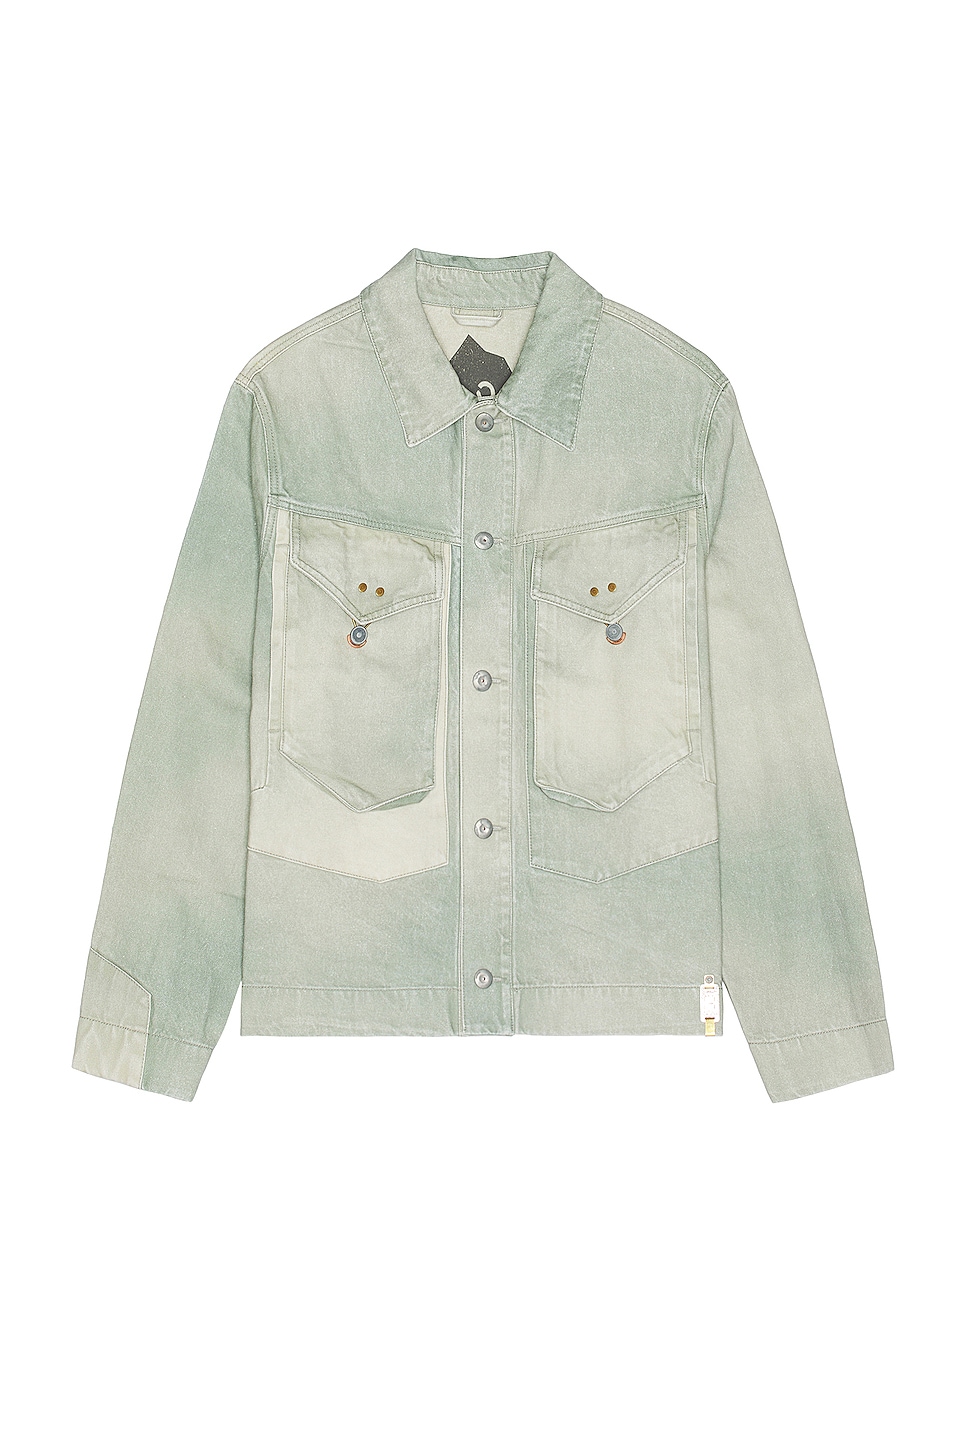 Image 1 of Objects IV Life Tradition Denim Jacket in Green Patina